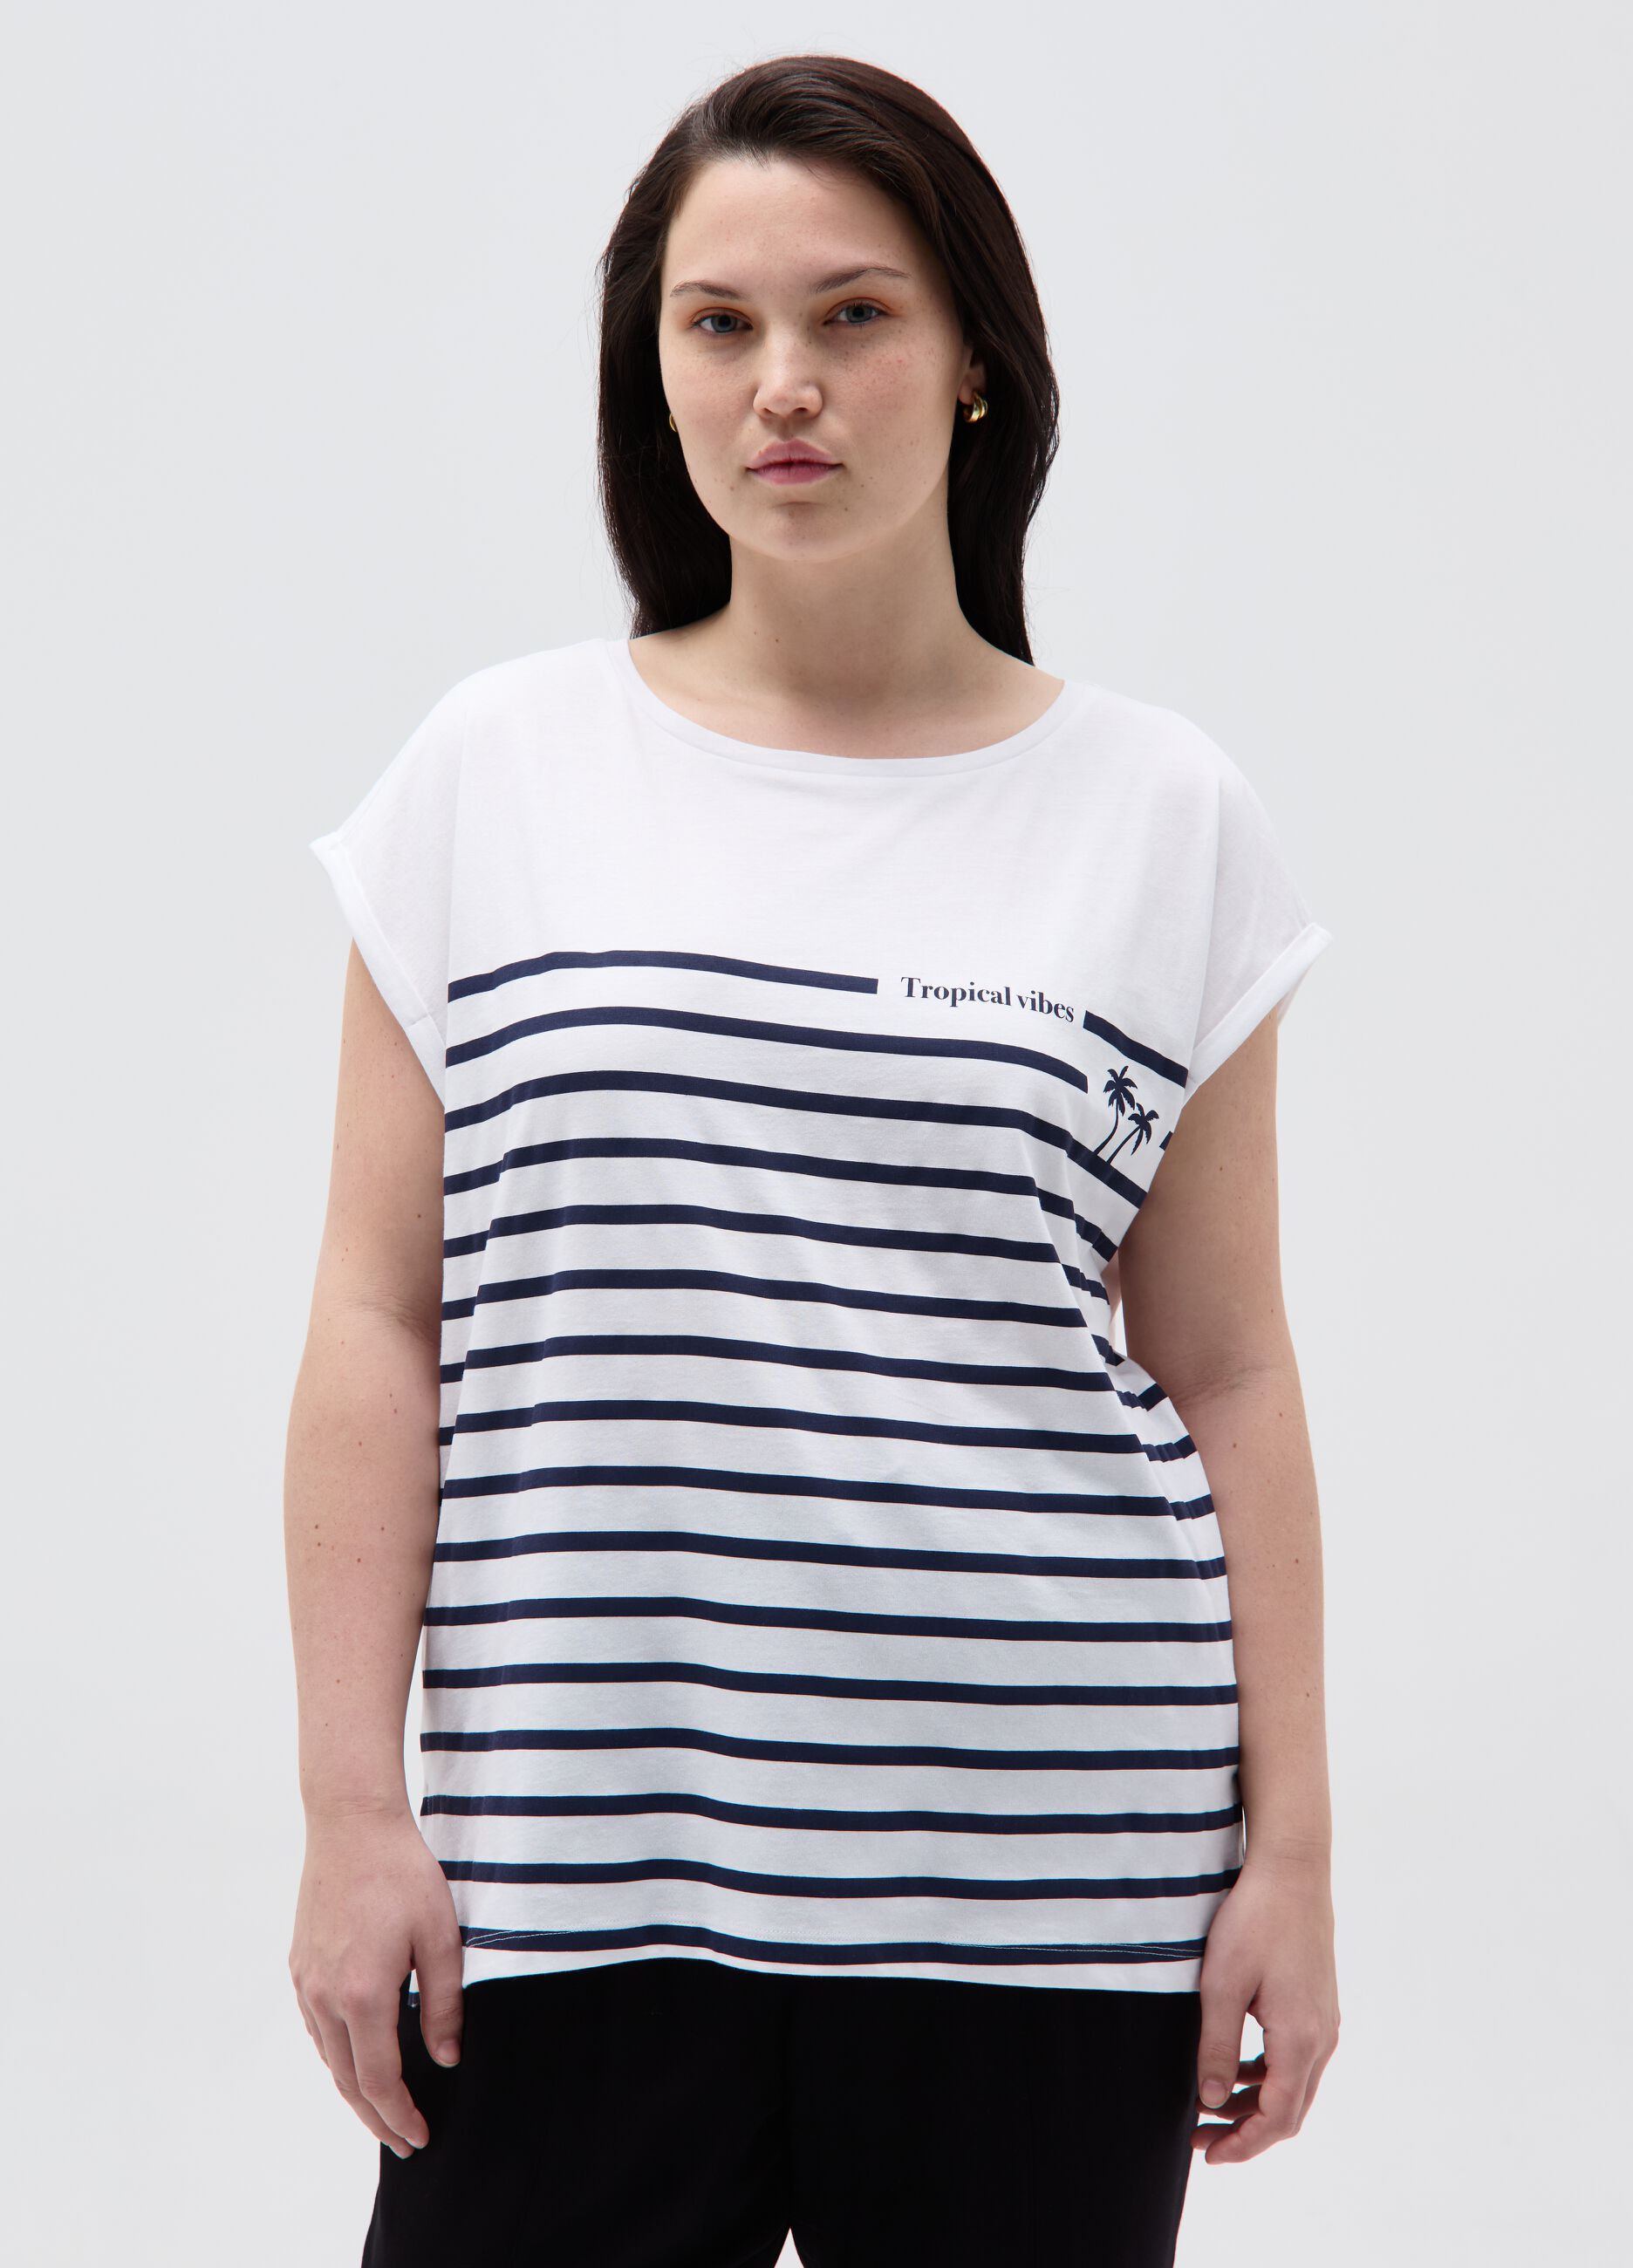 Curvy striped T-shirt with tropical print